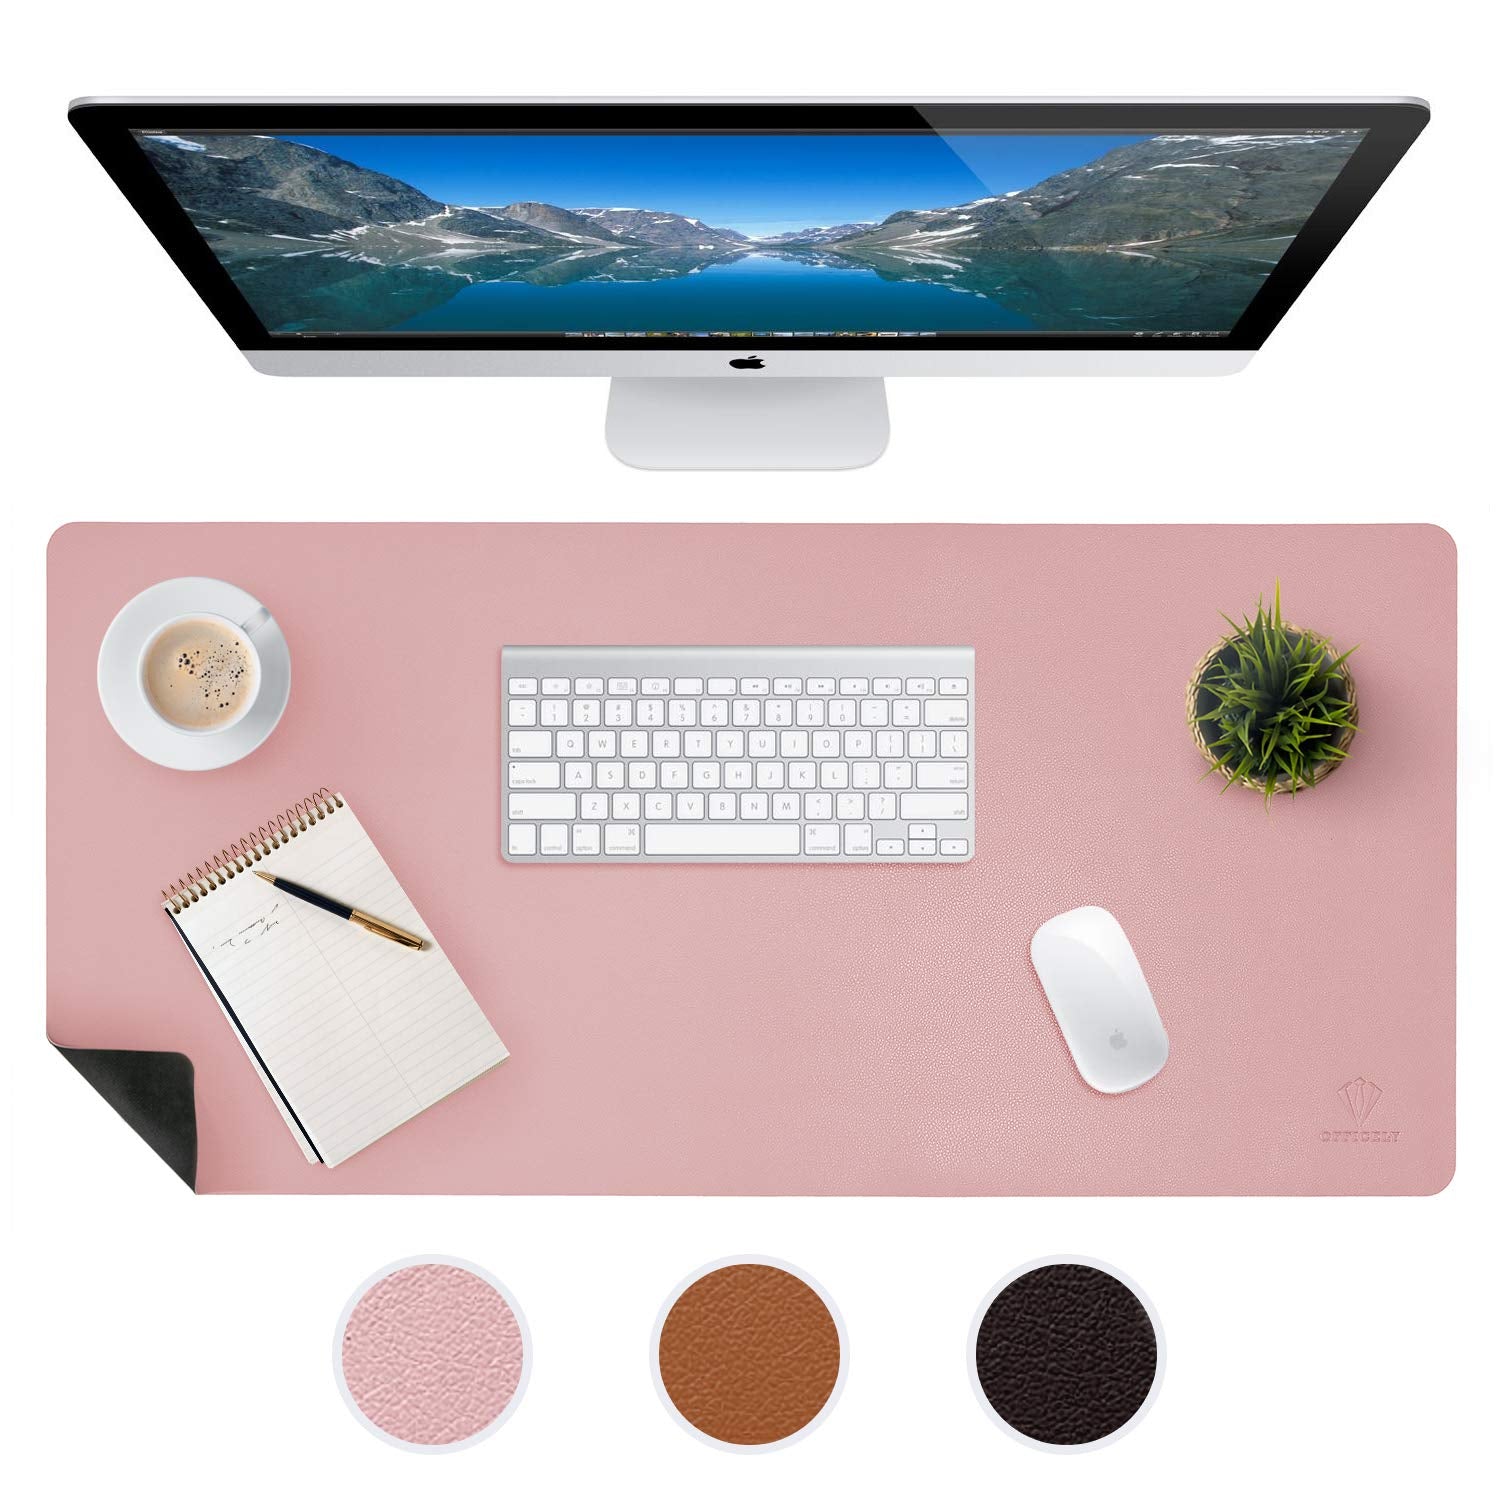 Large Leather Desk Mats for Keyboard and Mouse Pad, Anti-Skid Backing with Heat Resistant and Waterproof Surface, Responsive Desktop for Gaming, Writing, or Home Office Work (Pink, 24X48)